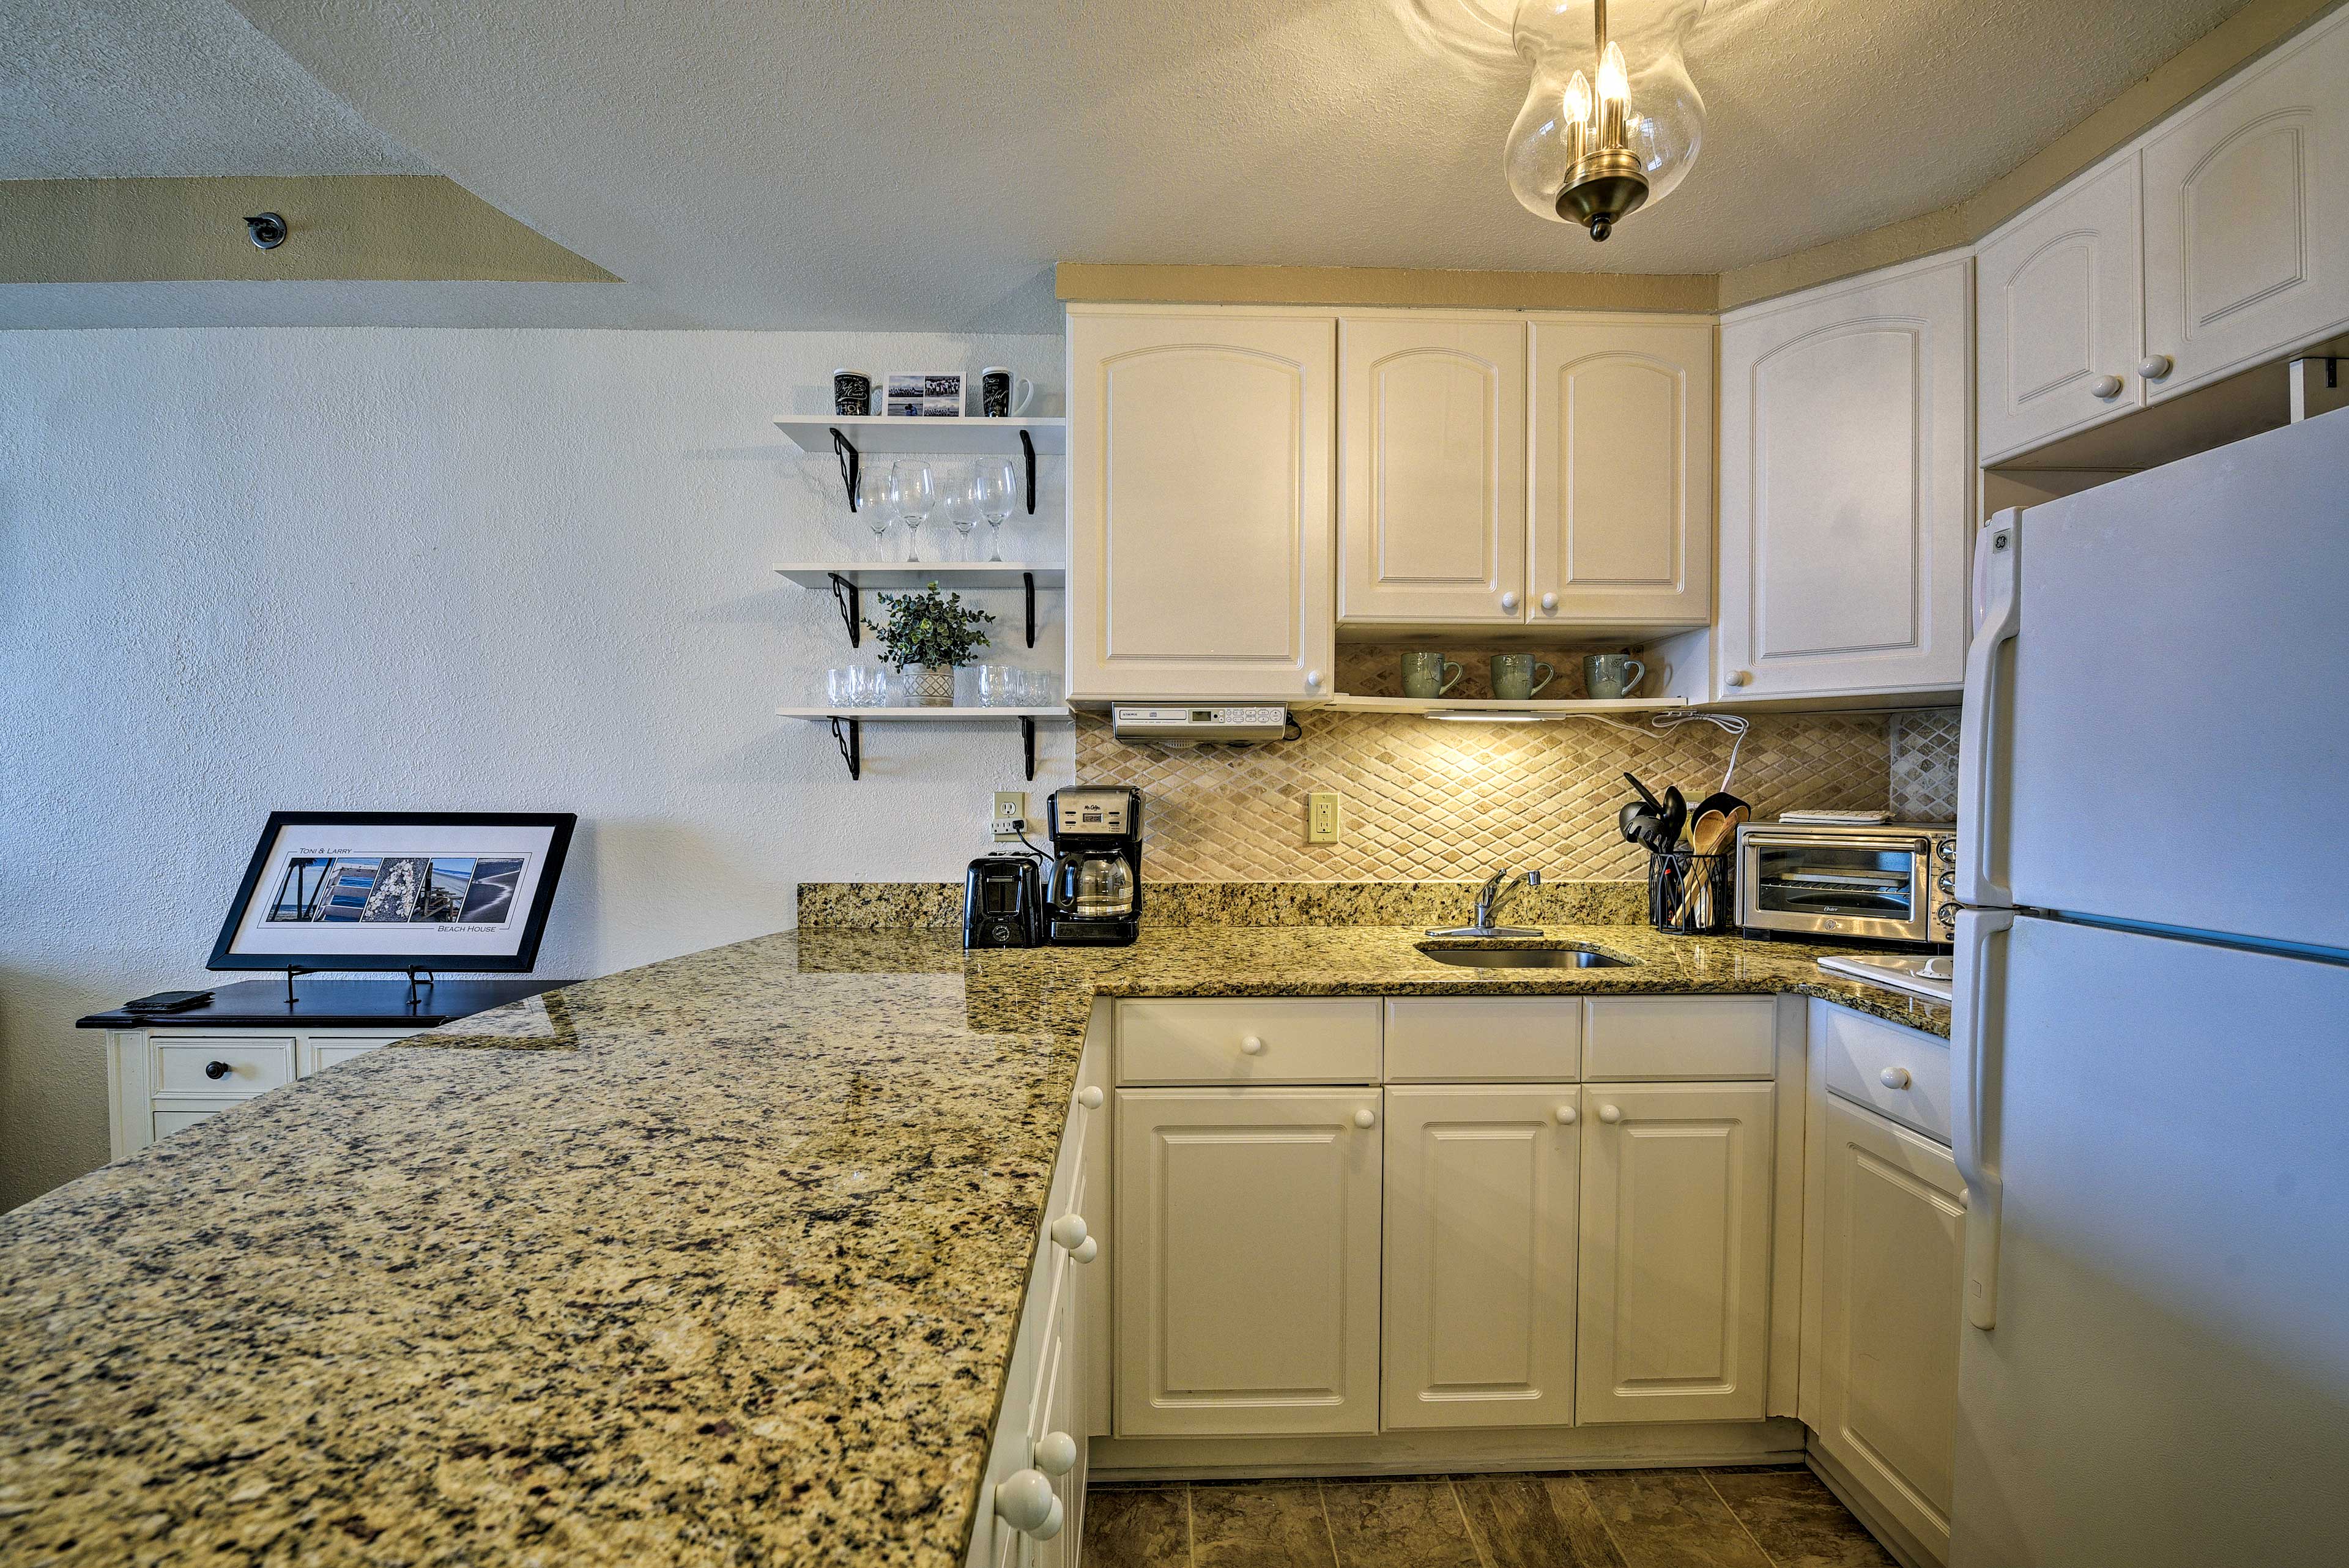 The well-equipped kitchen makes cooking a breeze.